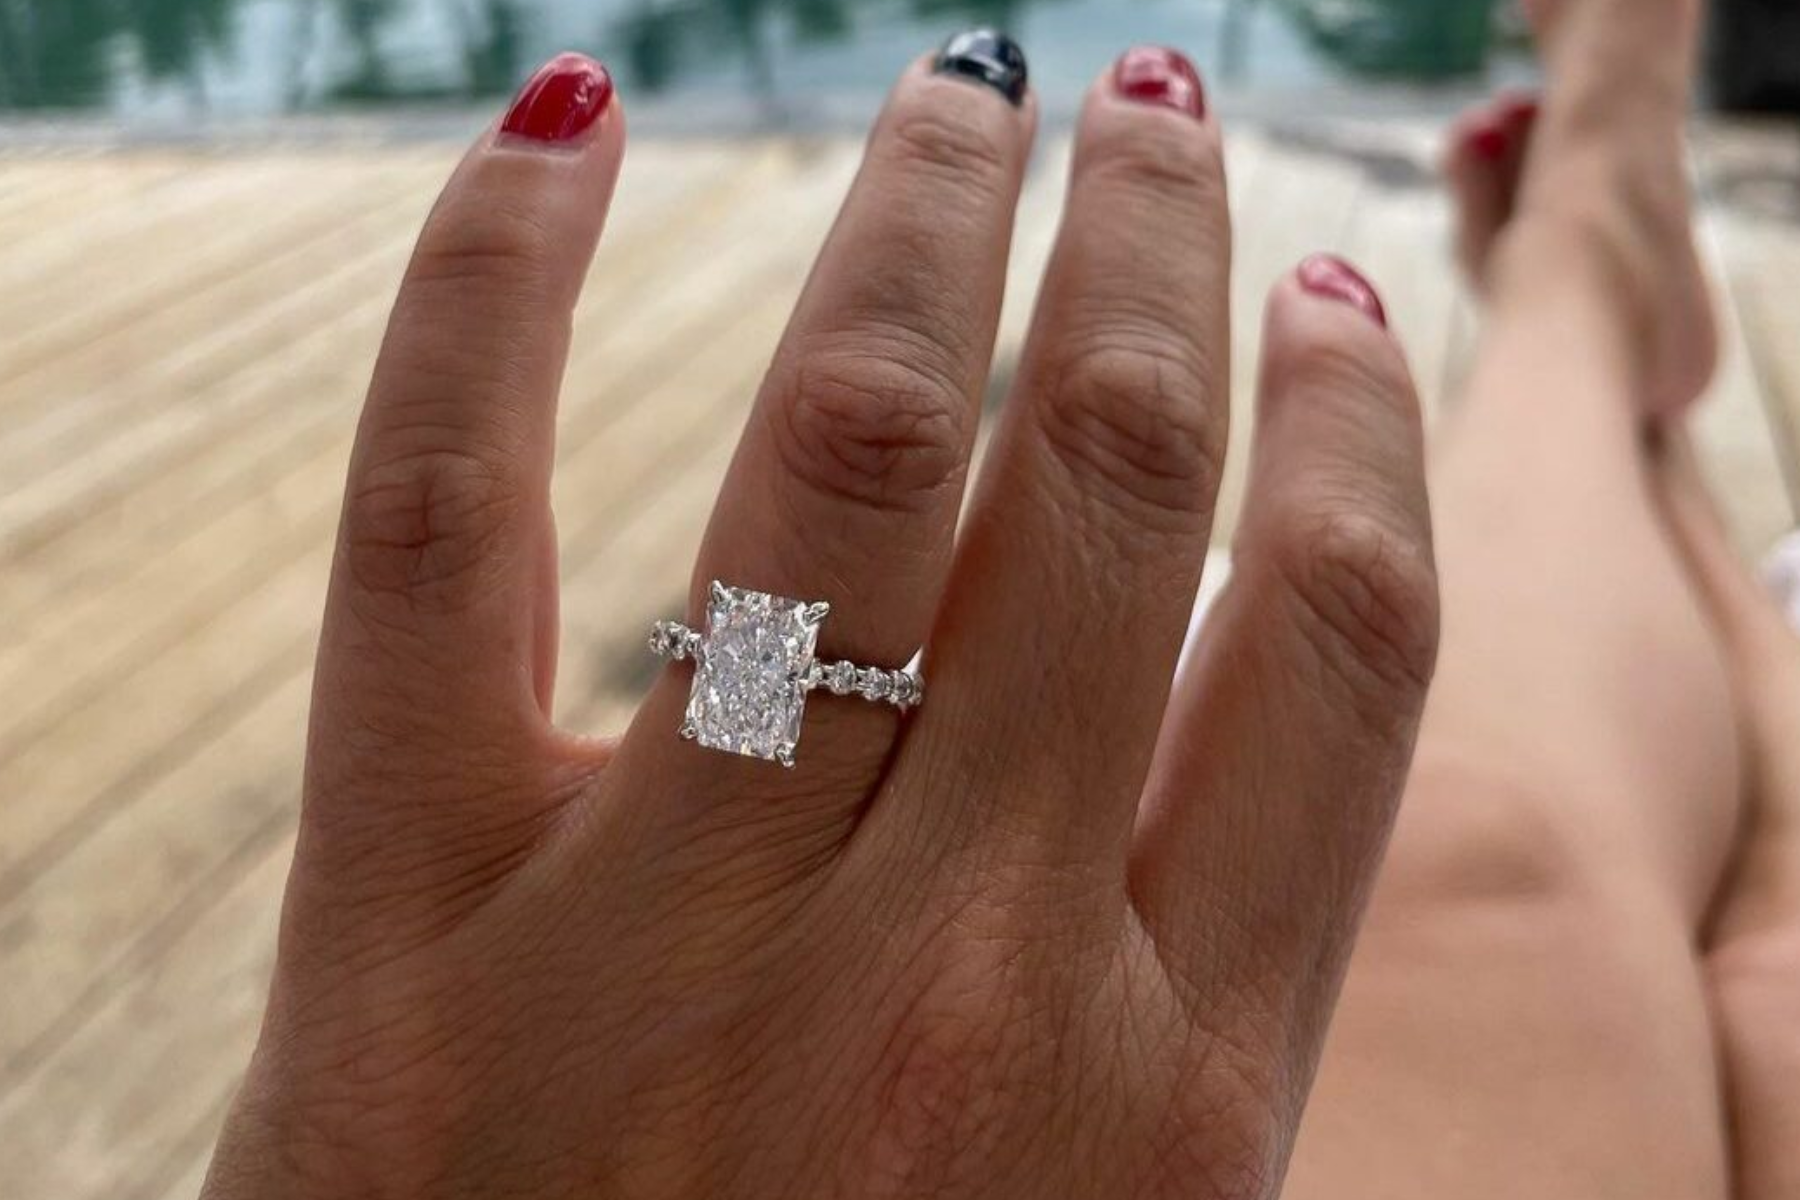 Radiant Cut Diamond Engagement Rings - Combination Of Shape And Sparkle